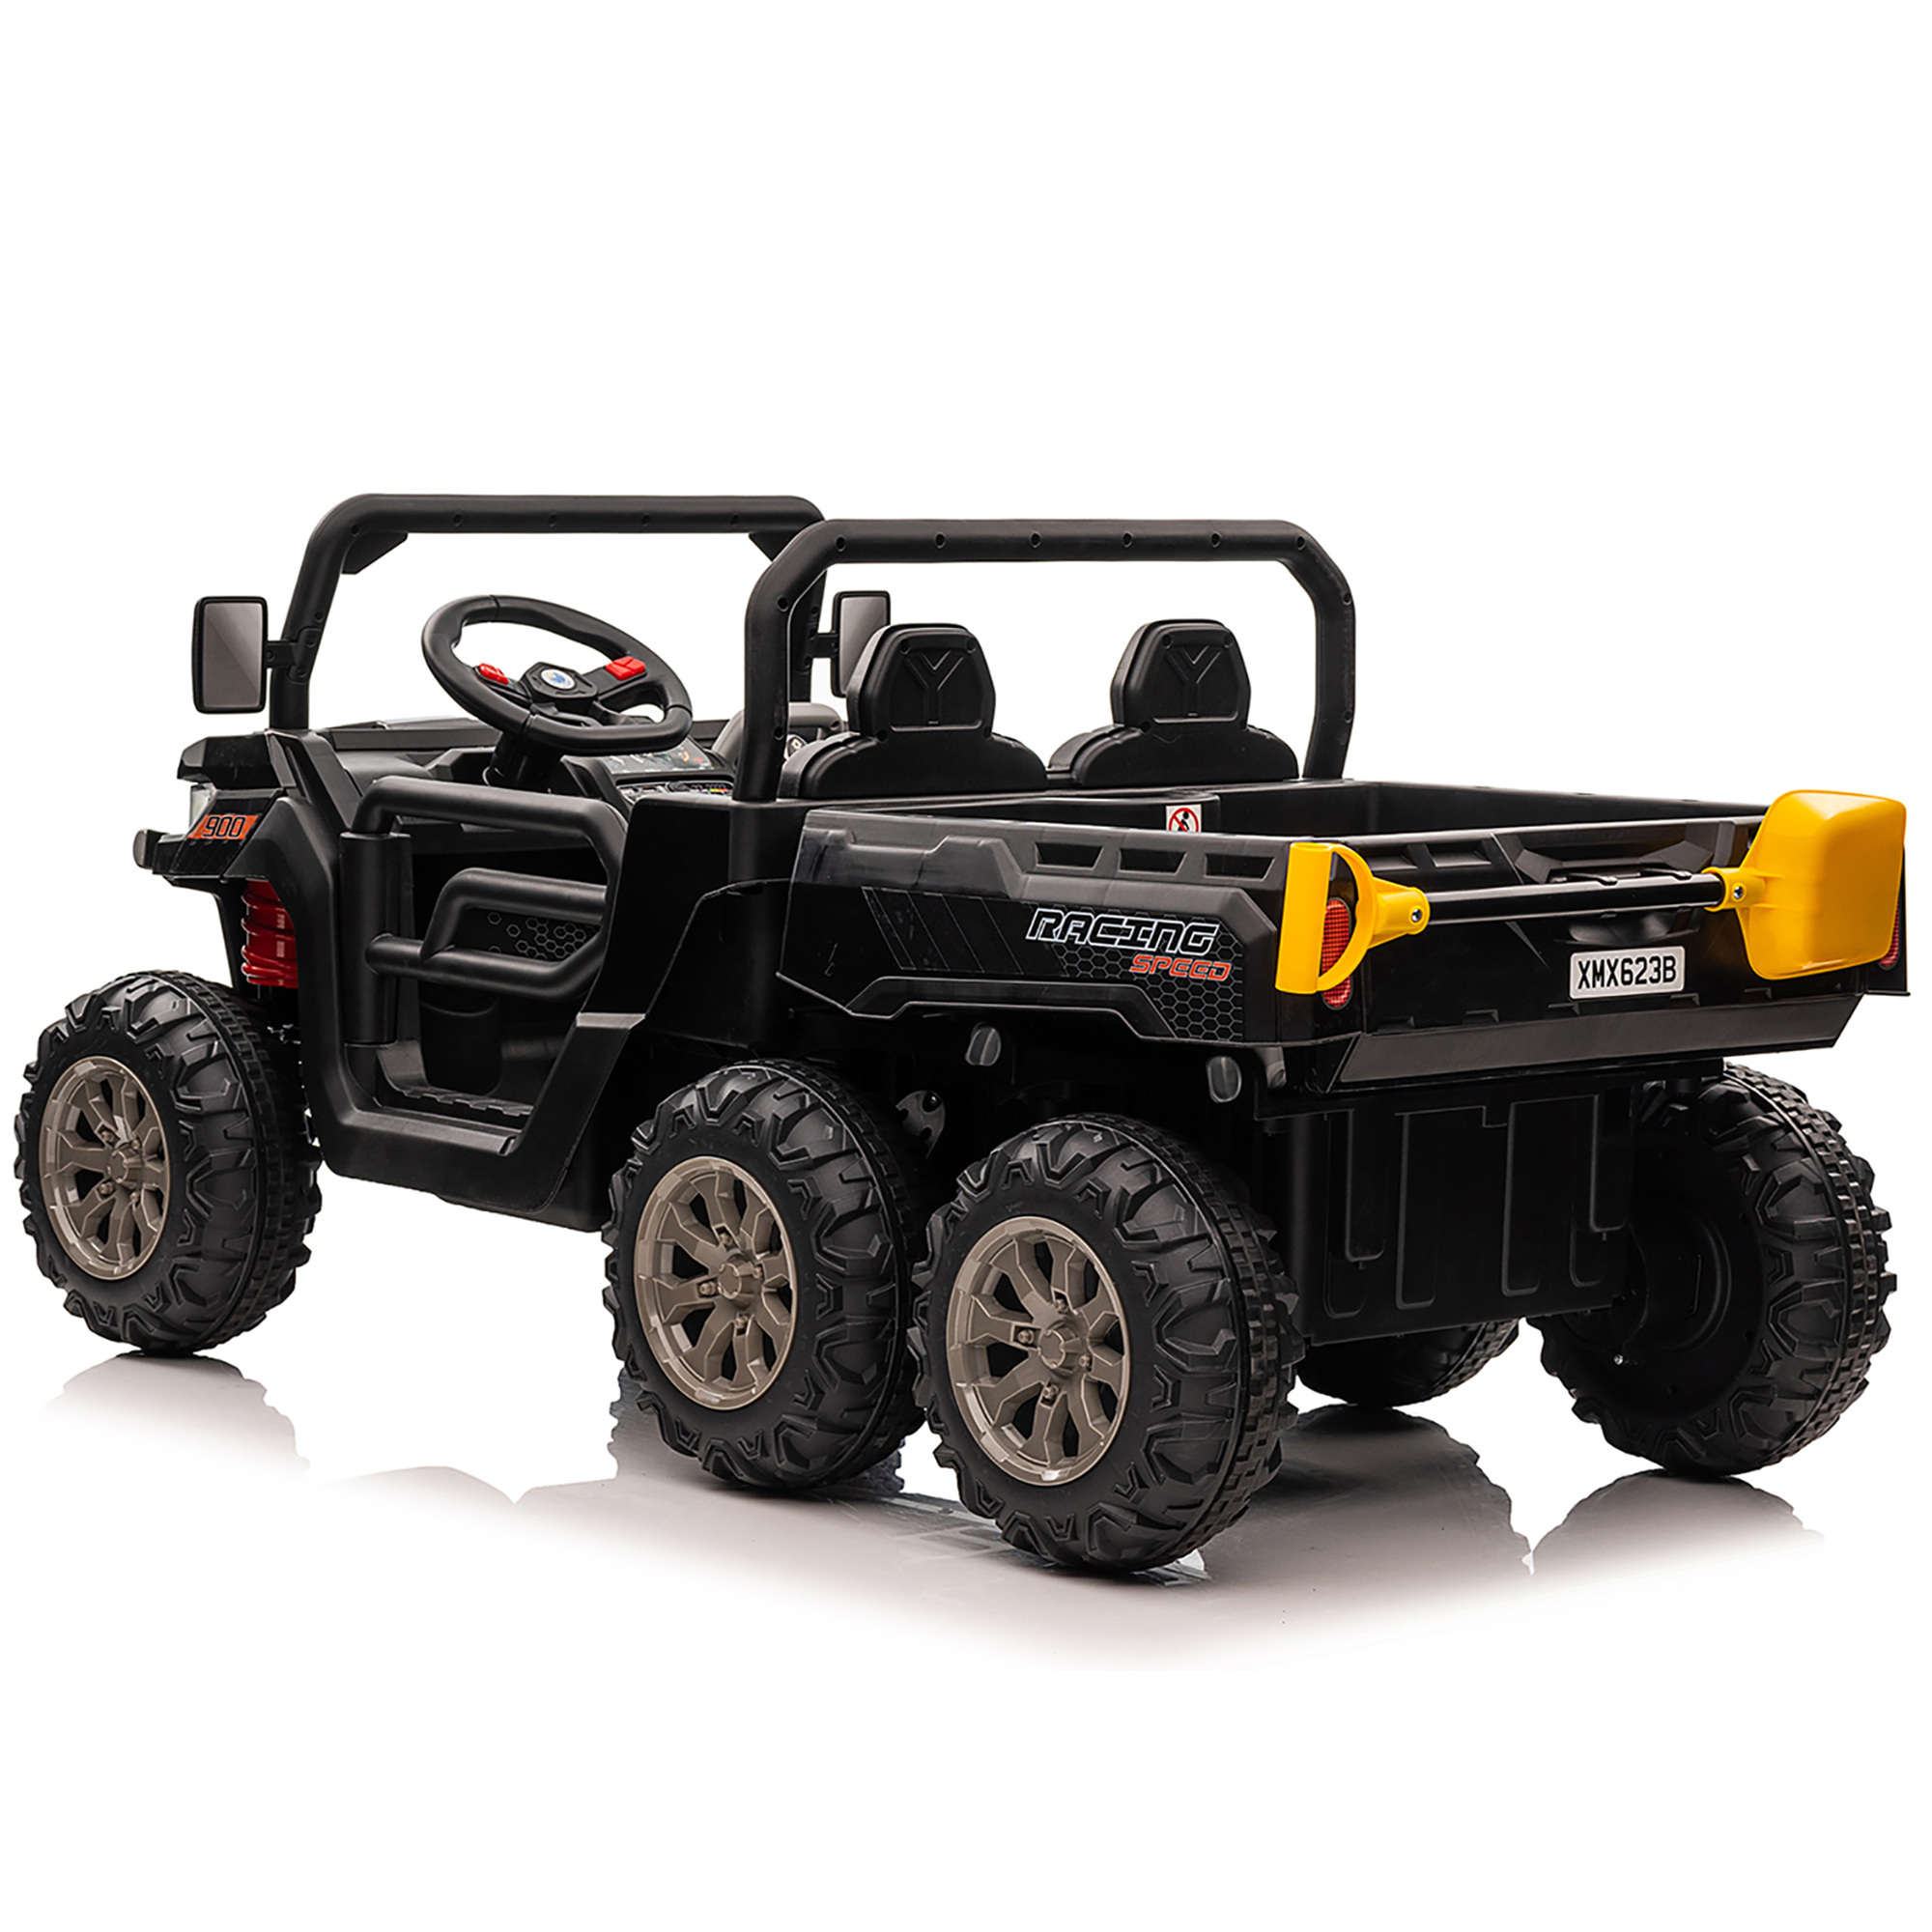 Joyracer 24 Volt Ride on Tractor with Remote Control, 4WD Motor 7AH Battery Powered Ride on Toys, 6-Wheel Big Car w/ Tipping Bucket Trailer, 3 Speeds,LED Lights, MP3/USB Music for Big Kids, Black - image 4 of 10